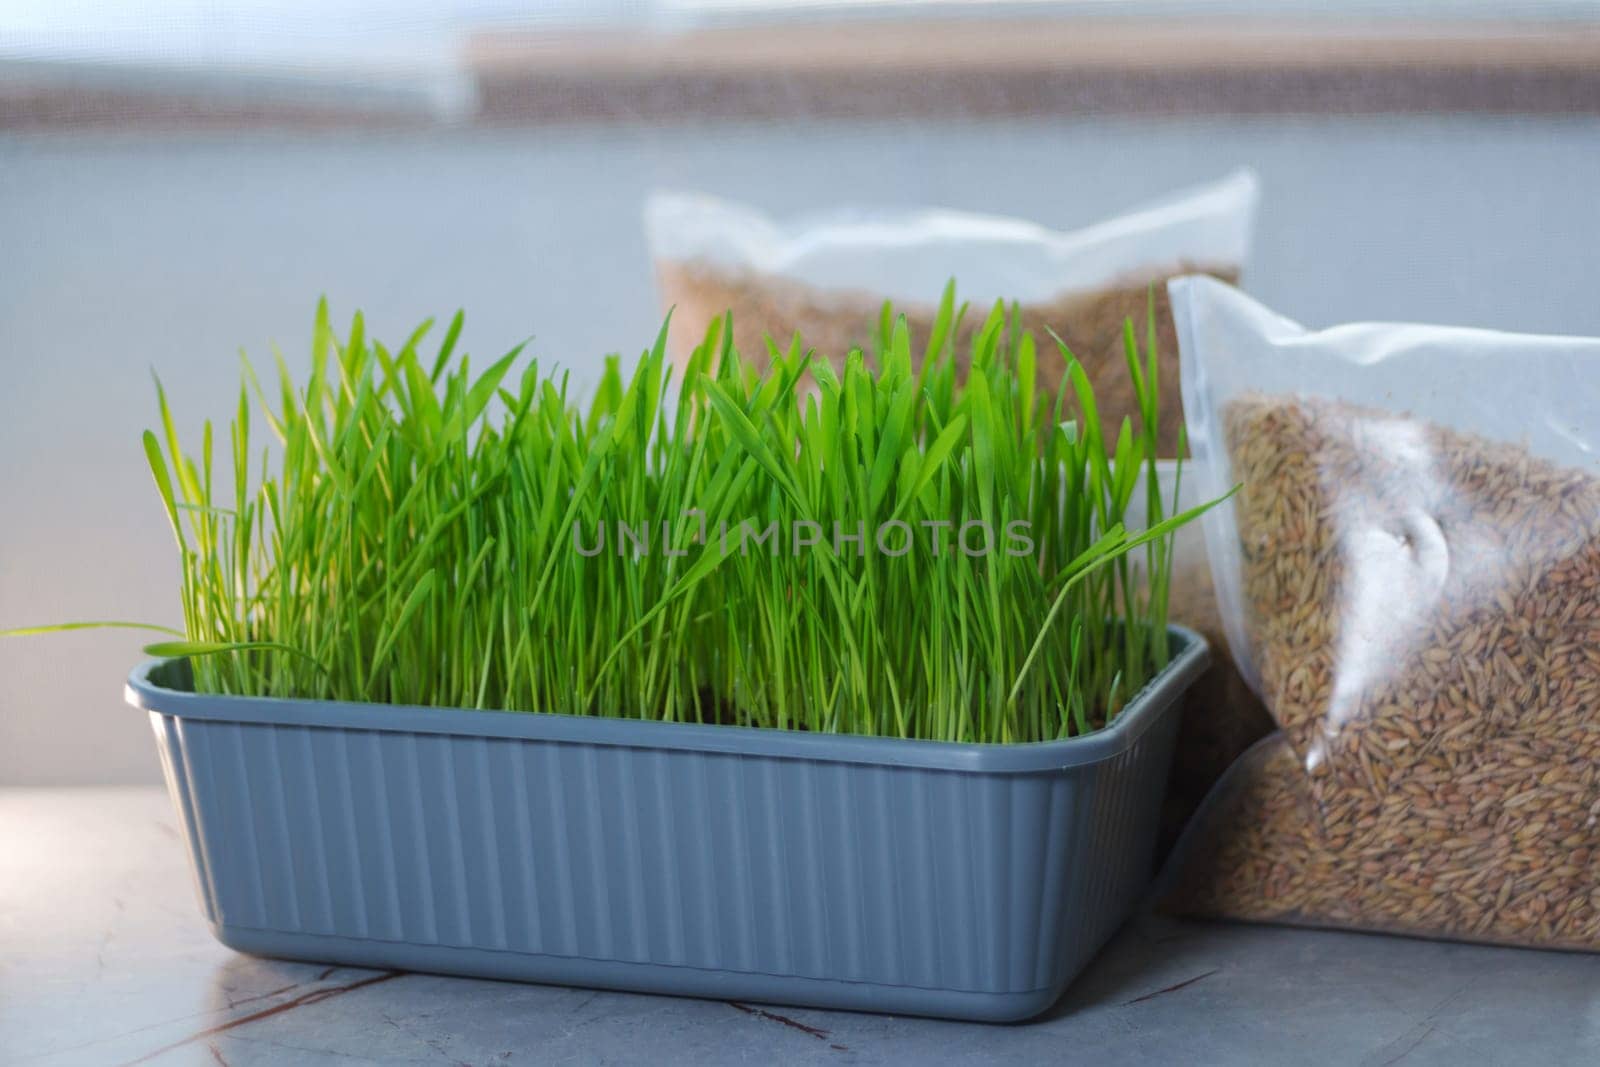 Bags filled with fresh grass, possibly for cats or growing microgreens, are placed side by side. by darksoul72